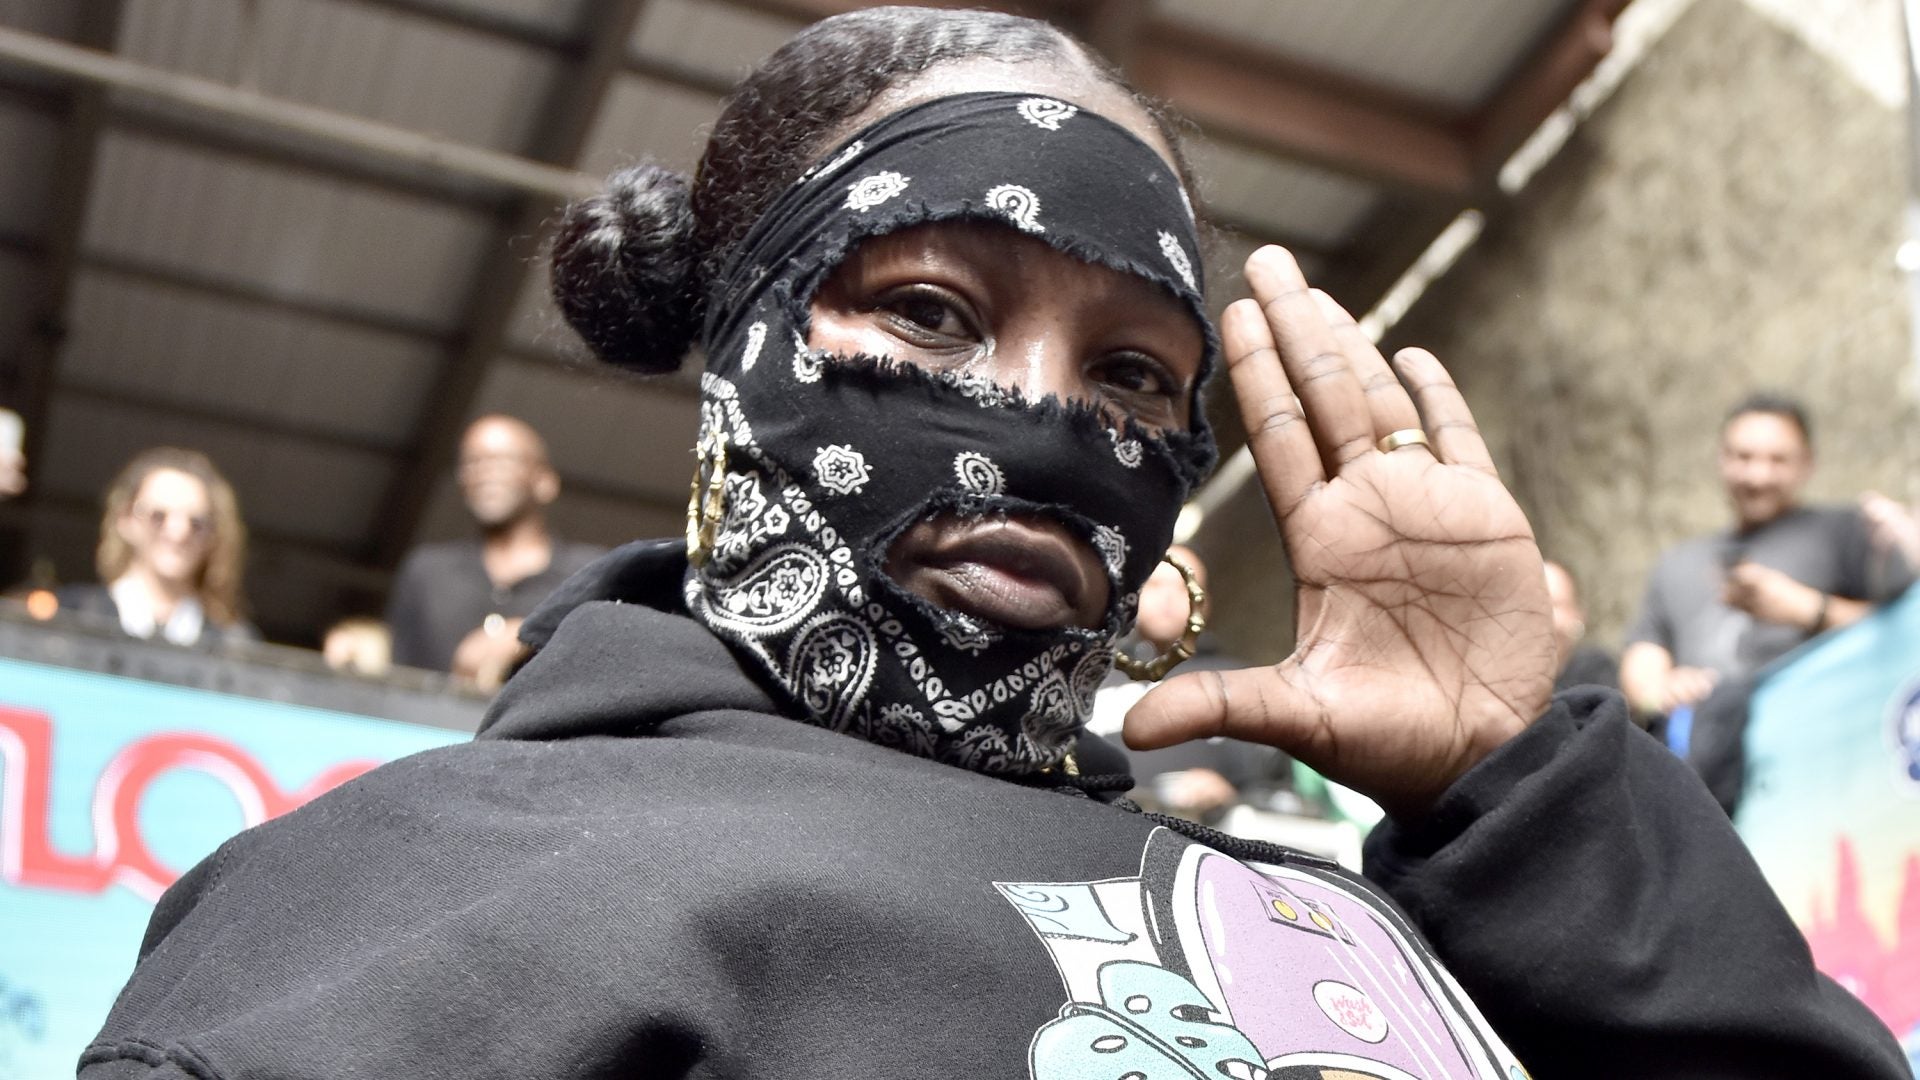 Leikeli47 Uplifts The Streets In This Week's Playlist